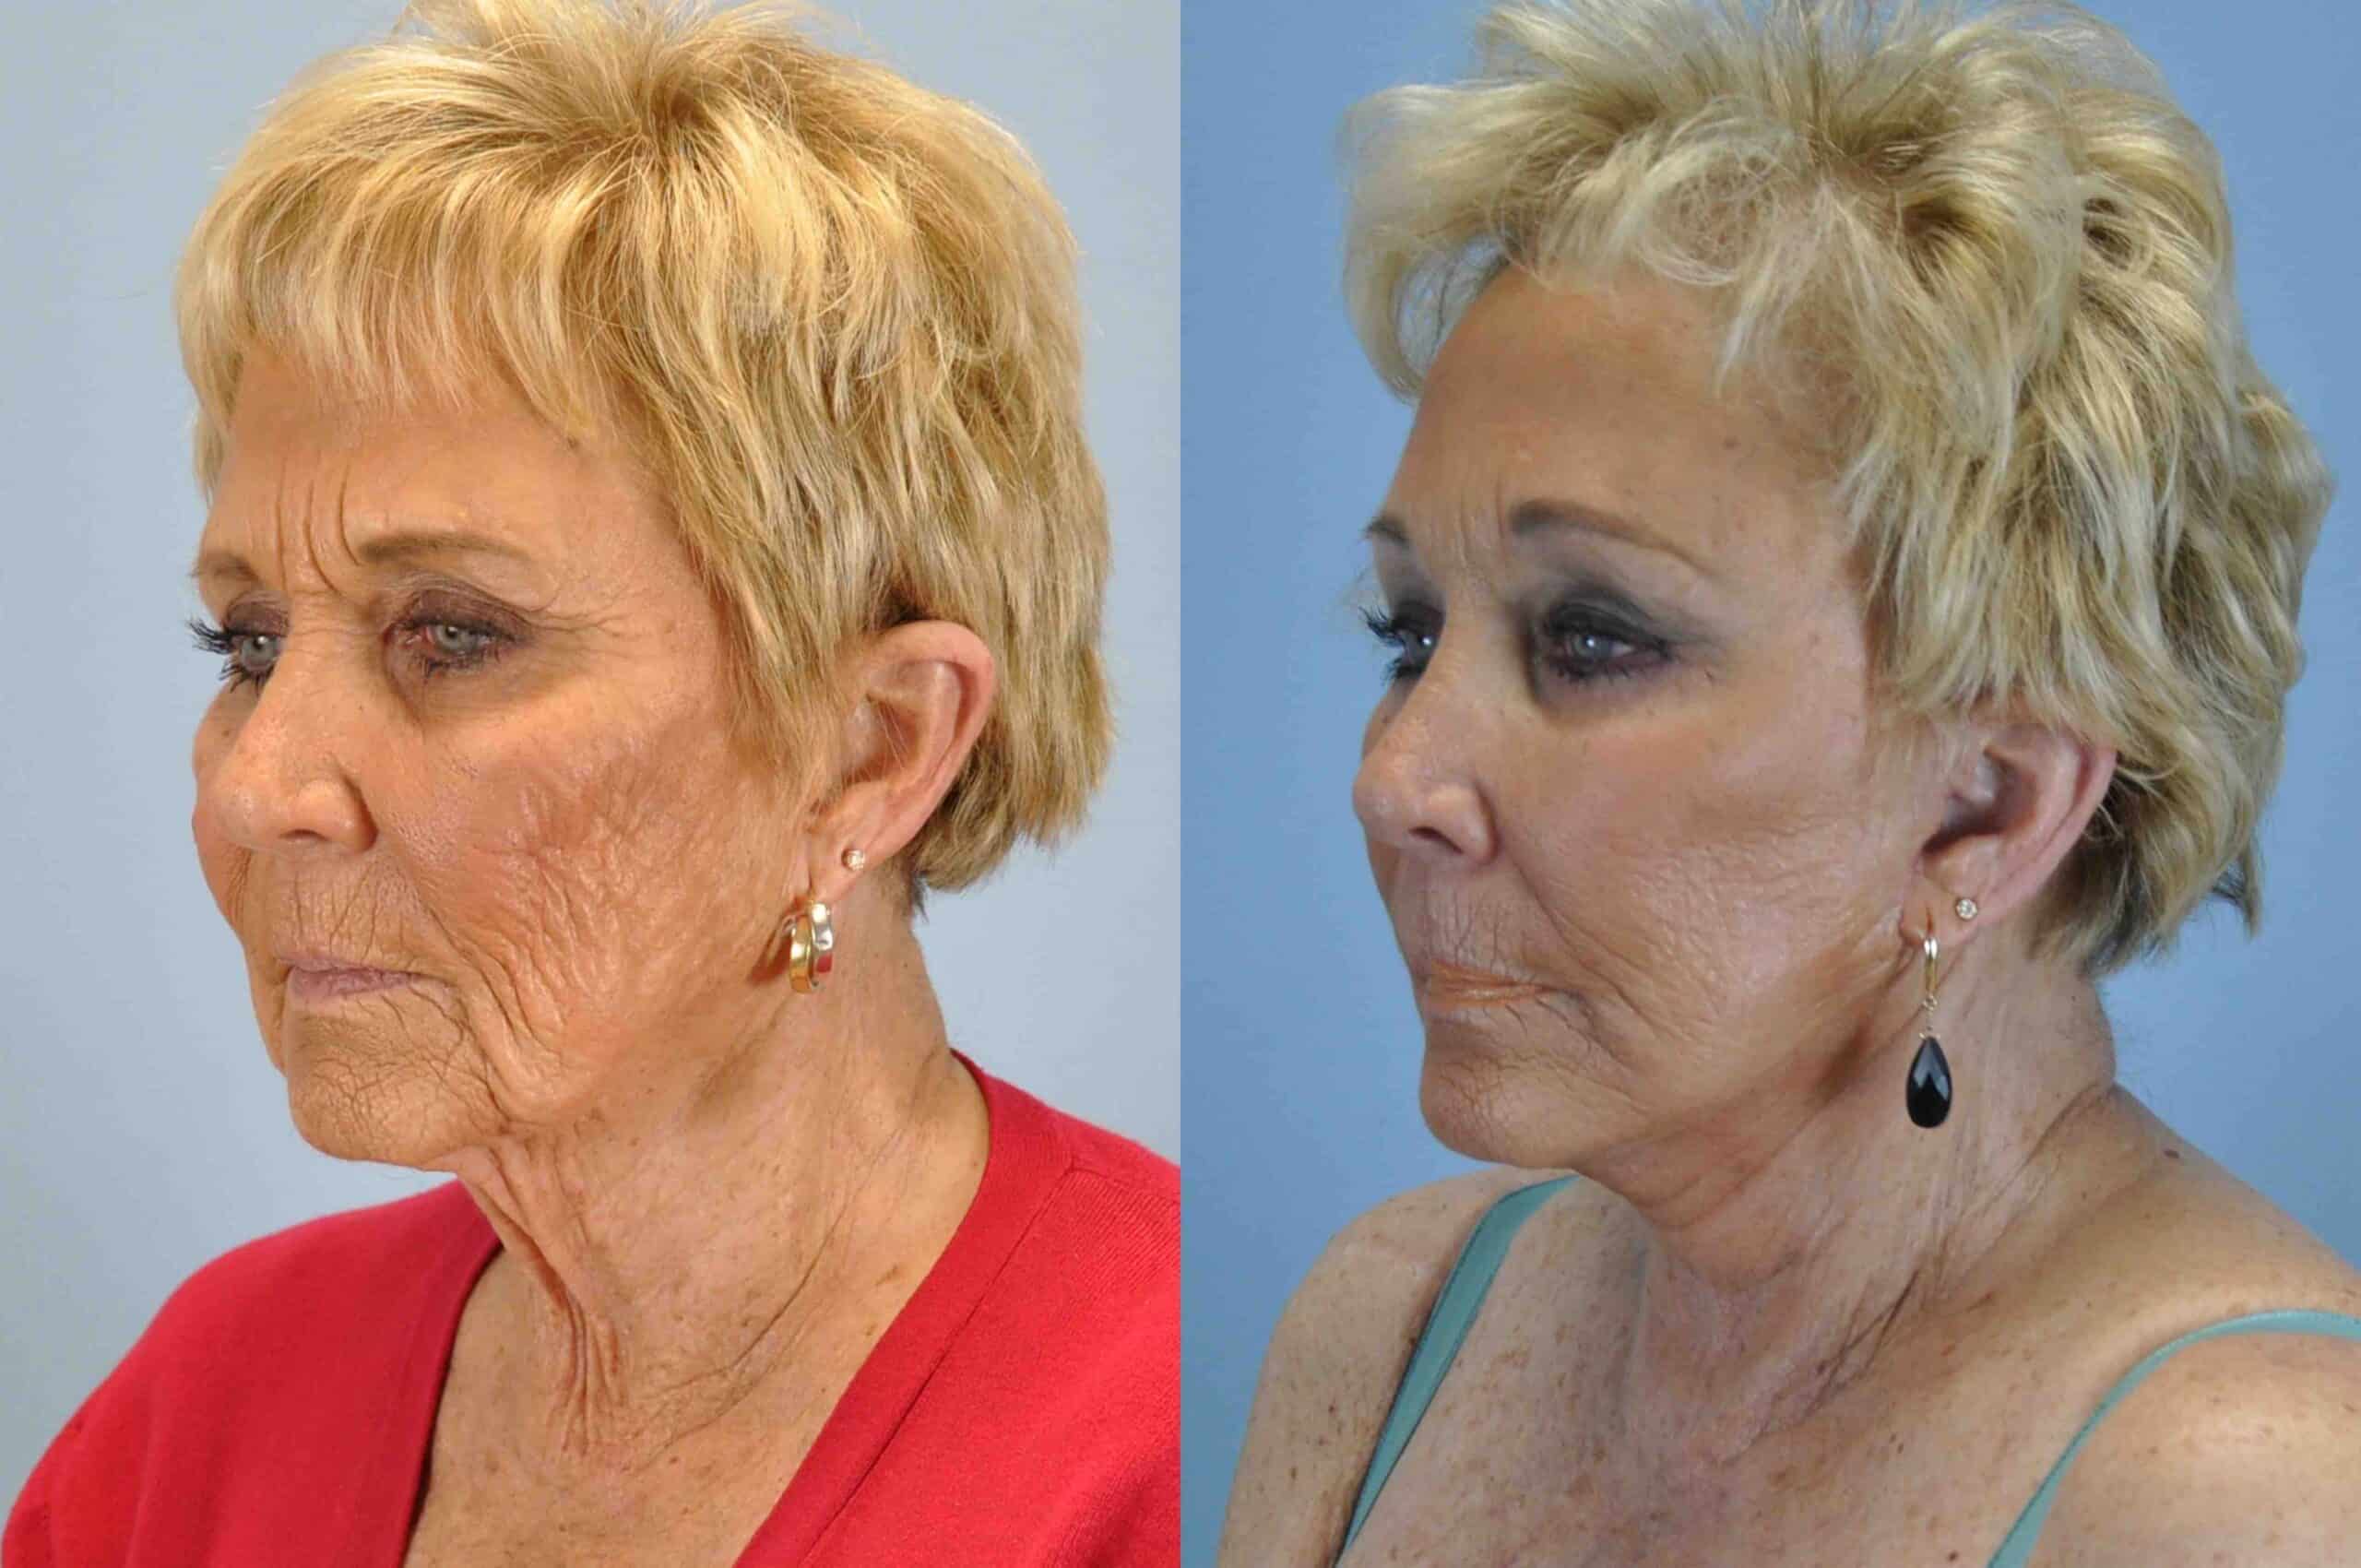 Before and after, 1 mo post op from Upper and Lower Blepharoplasty, Facelift, Neck Lift, Endo Brow Lift performed by Dr. Paul Vanek (diagonal view)